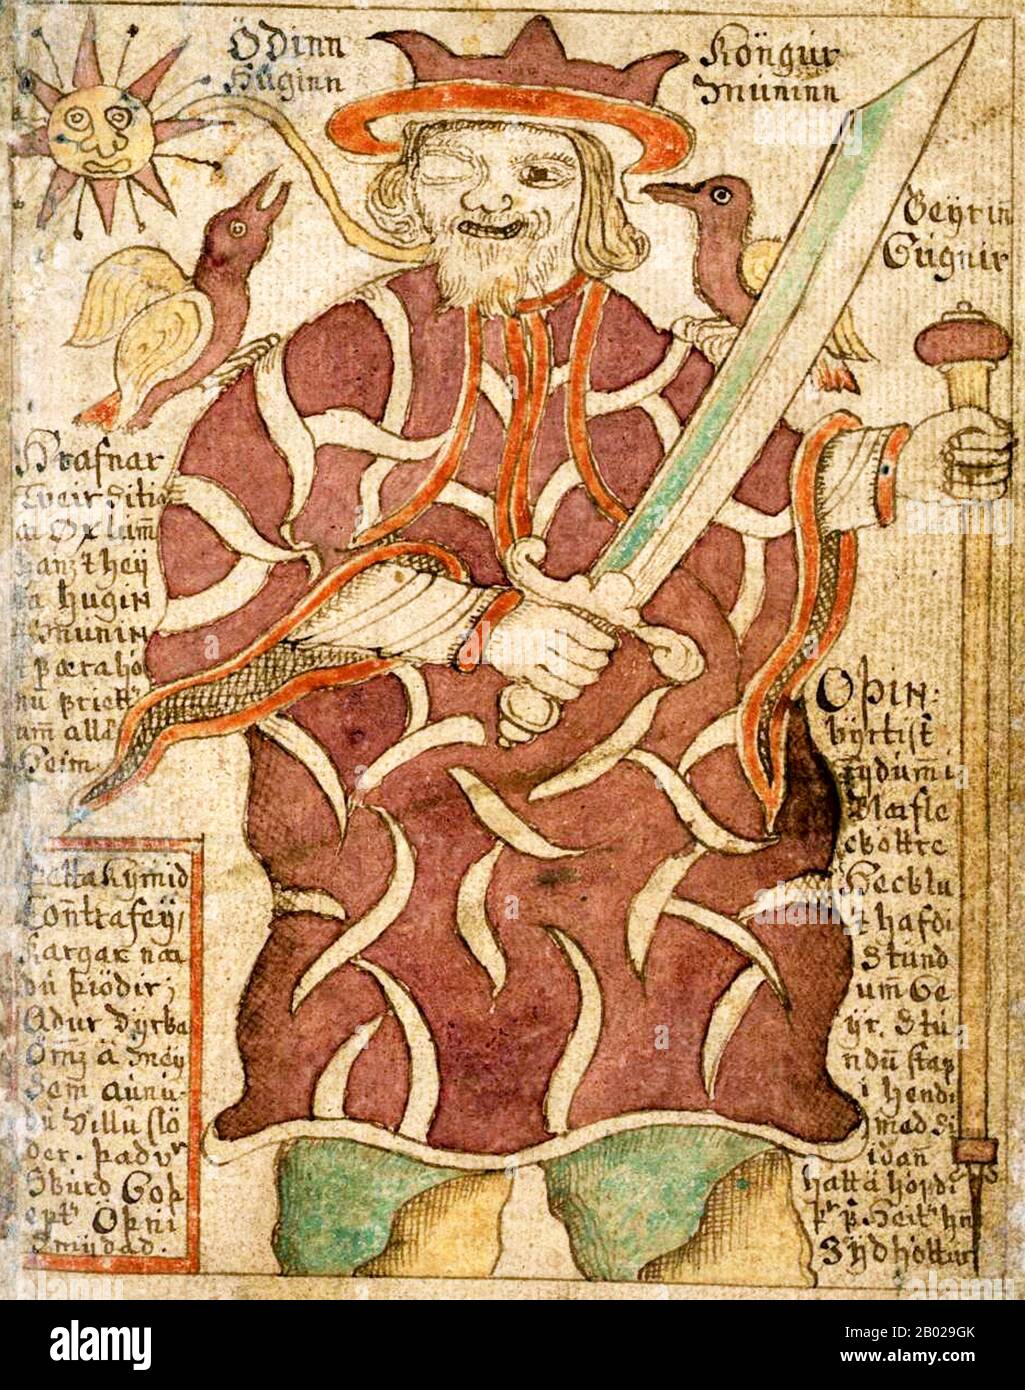 Odin (from Old Norse Óðinn) is a major god in Norse mythology, the Allfather of the gods, and the ruler of Asgard.  His role, like that of many of the Norse gods, is complex. Odin is a principal member of the Æsir (the major group of the Norse pantheon) and is associated with war, battle, victory and death, but also wisdom, Shamanism, magic, poetry, prophecy, and the hunt.  Odin has many sons, the most famous of whom is the thunder god Thor. Wednesday is the unified form of Woden's day as most days of the week are named after the Norse Gods. Stock Photo